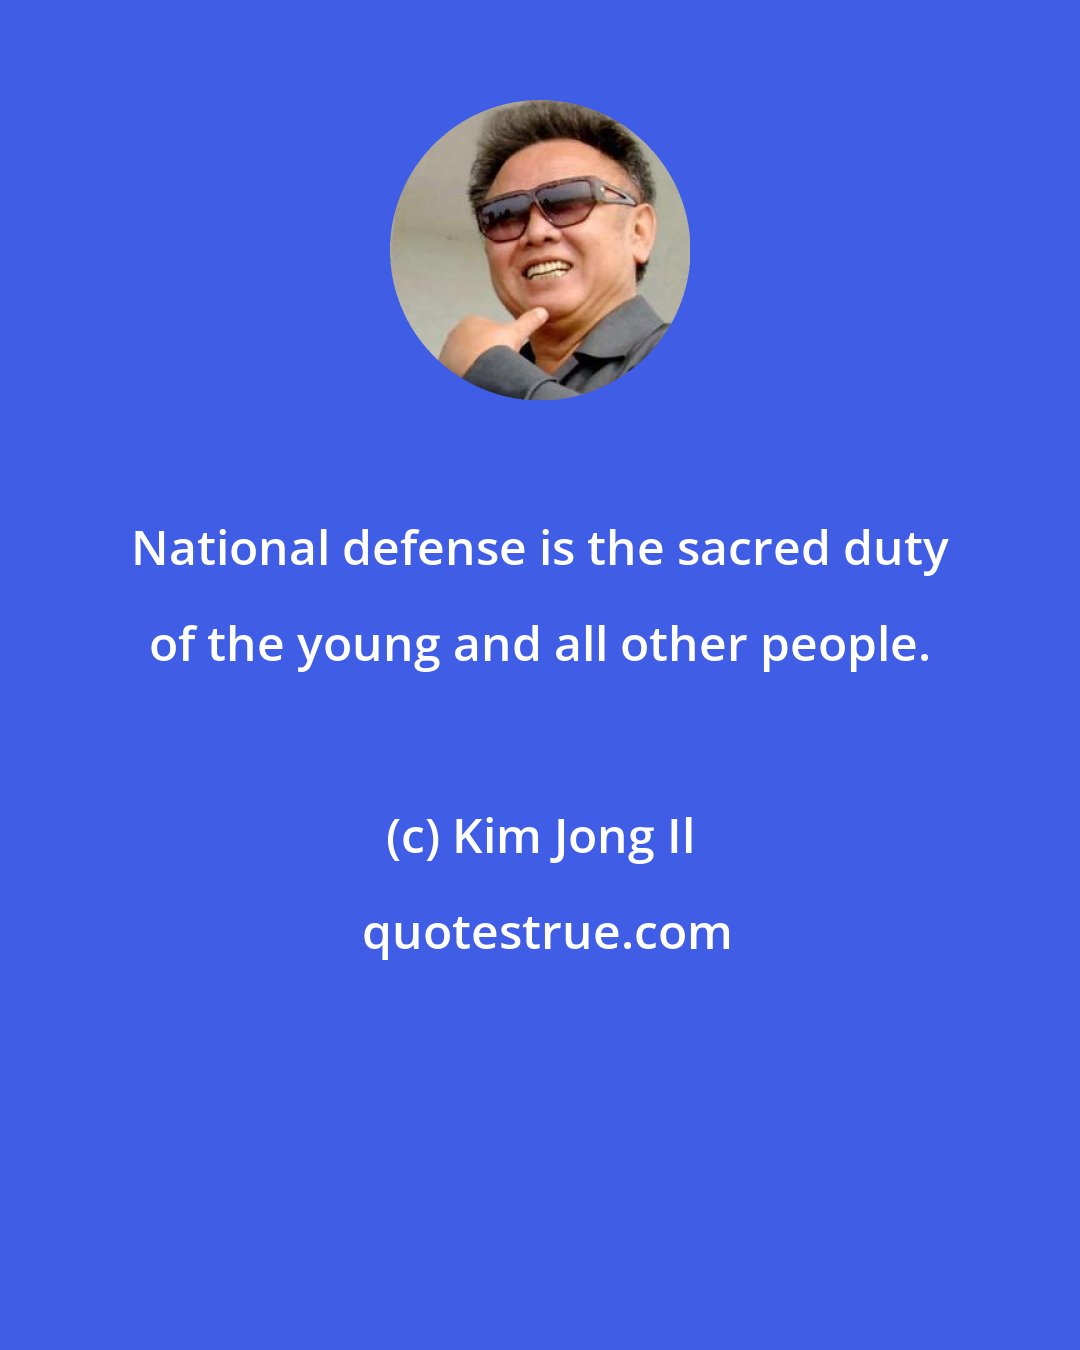 Kim Jong Il: National defense is the sacred duty of the young and all other people.